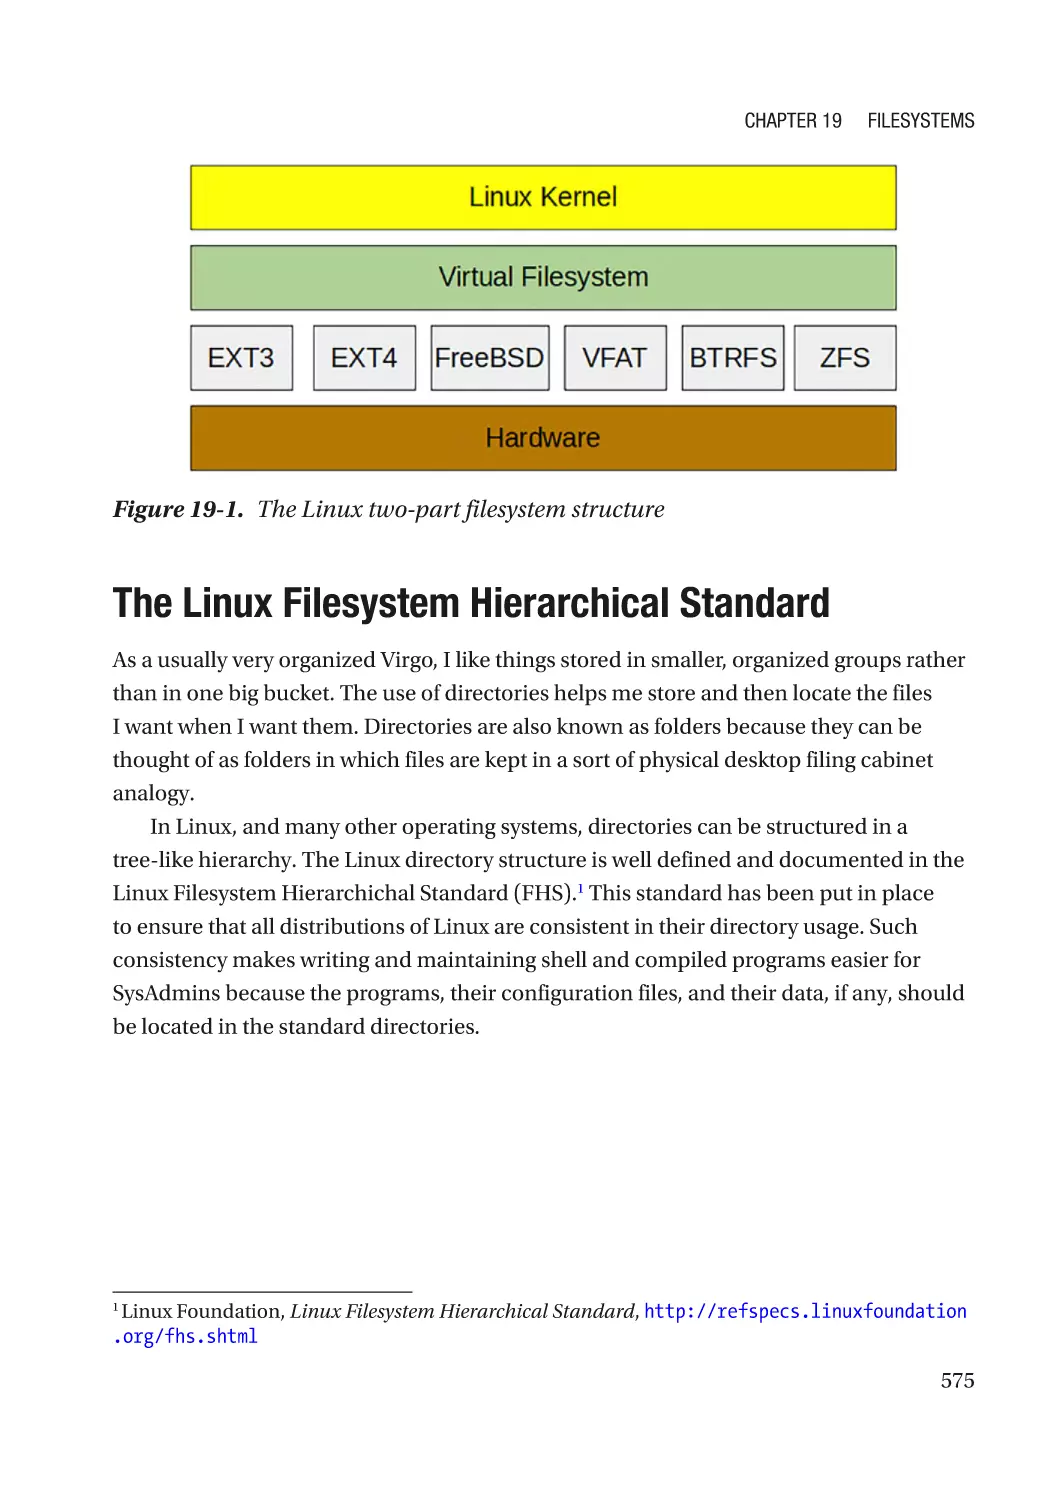 The Linux Filesystem Hierarchical Standard